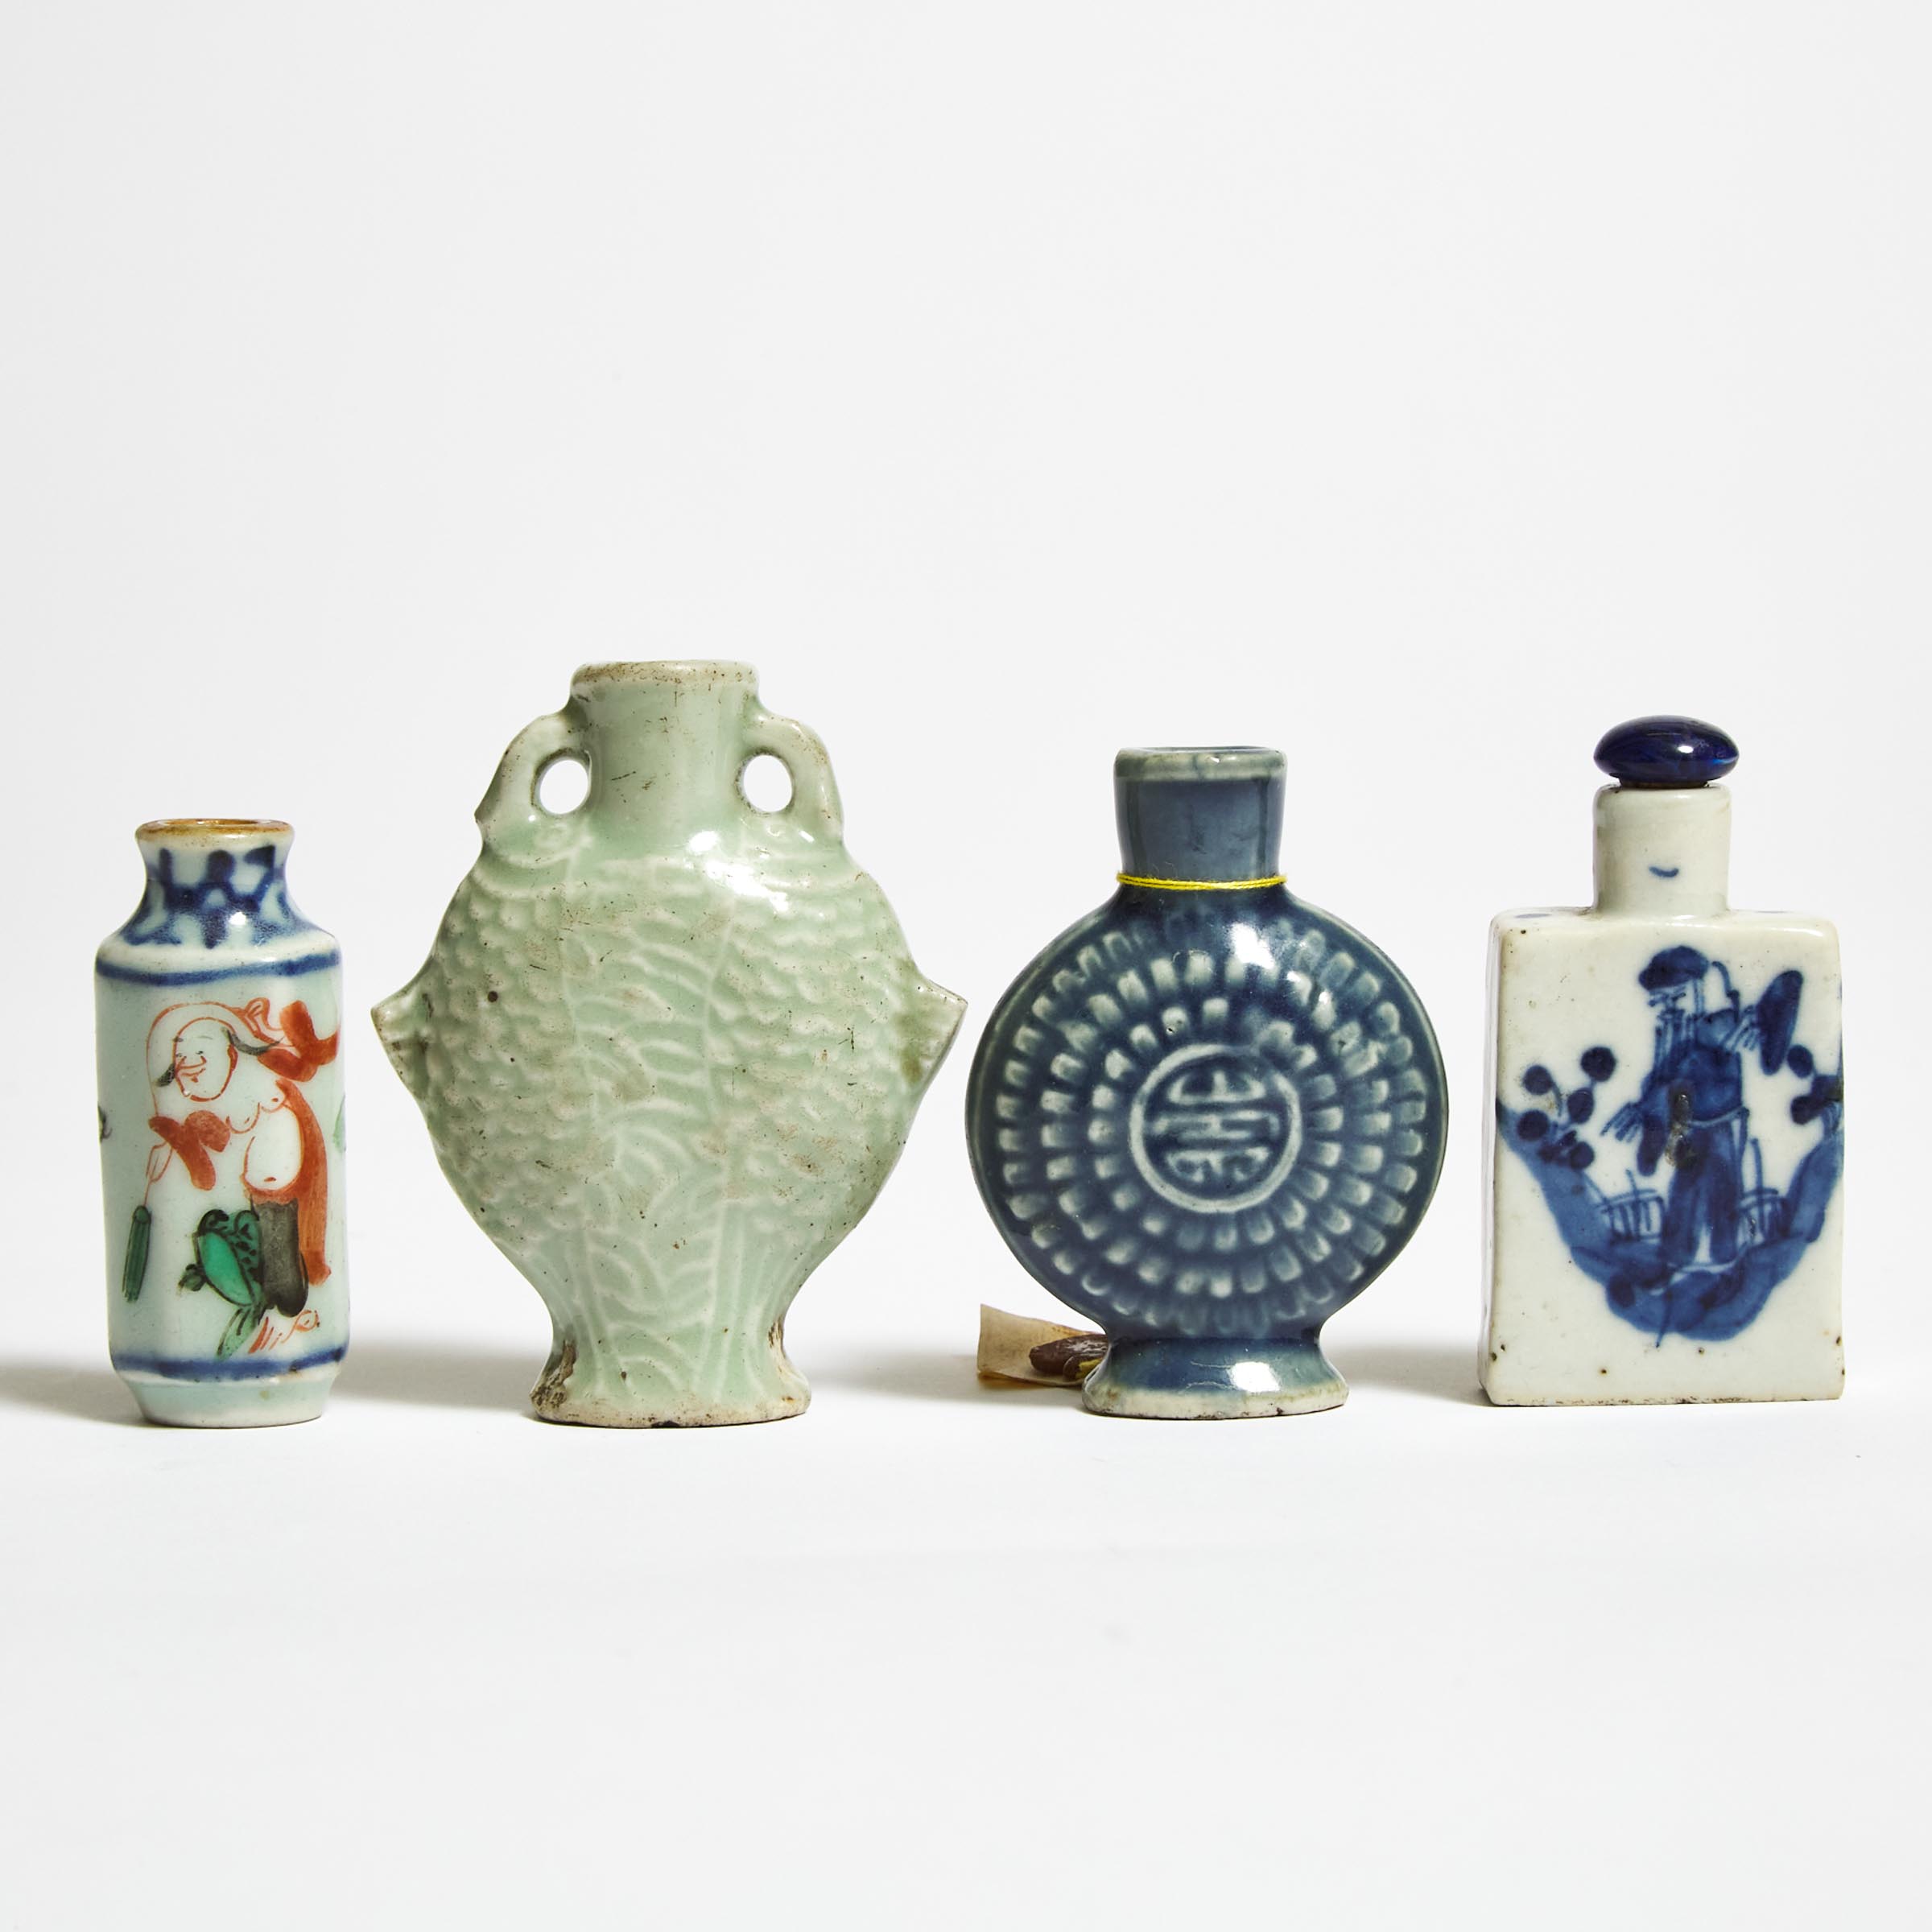 A Group of Four Porcelain Snuff Bottles, 18th/19th Century